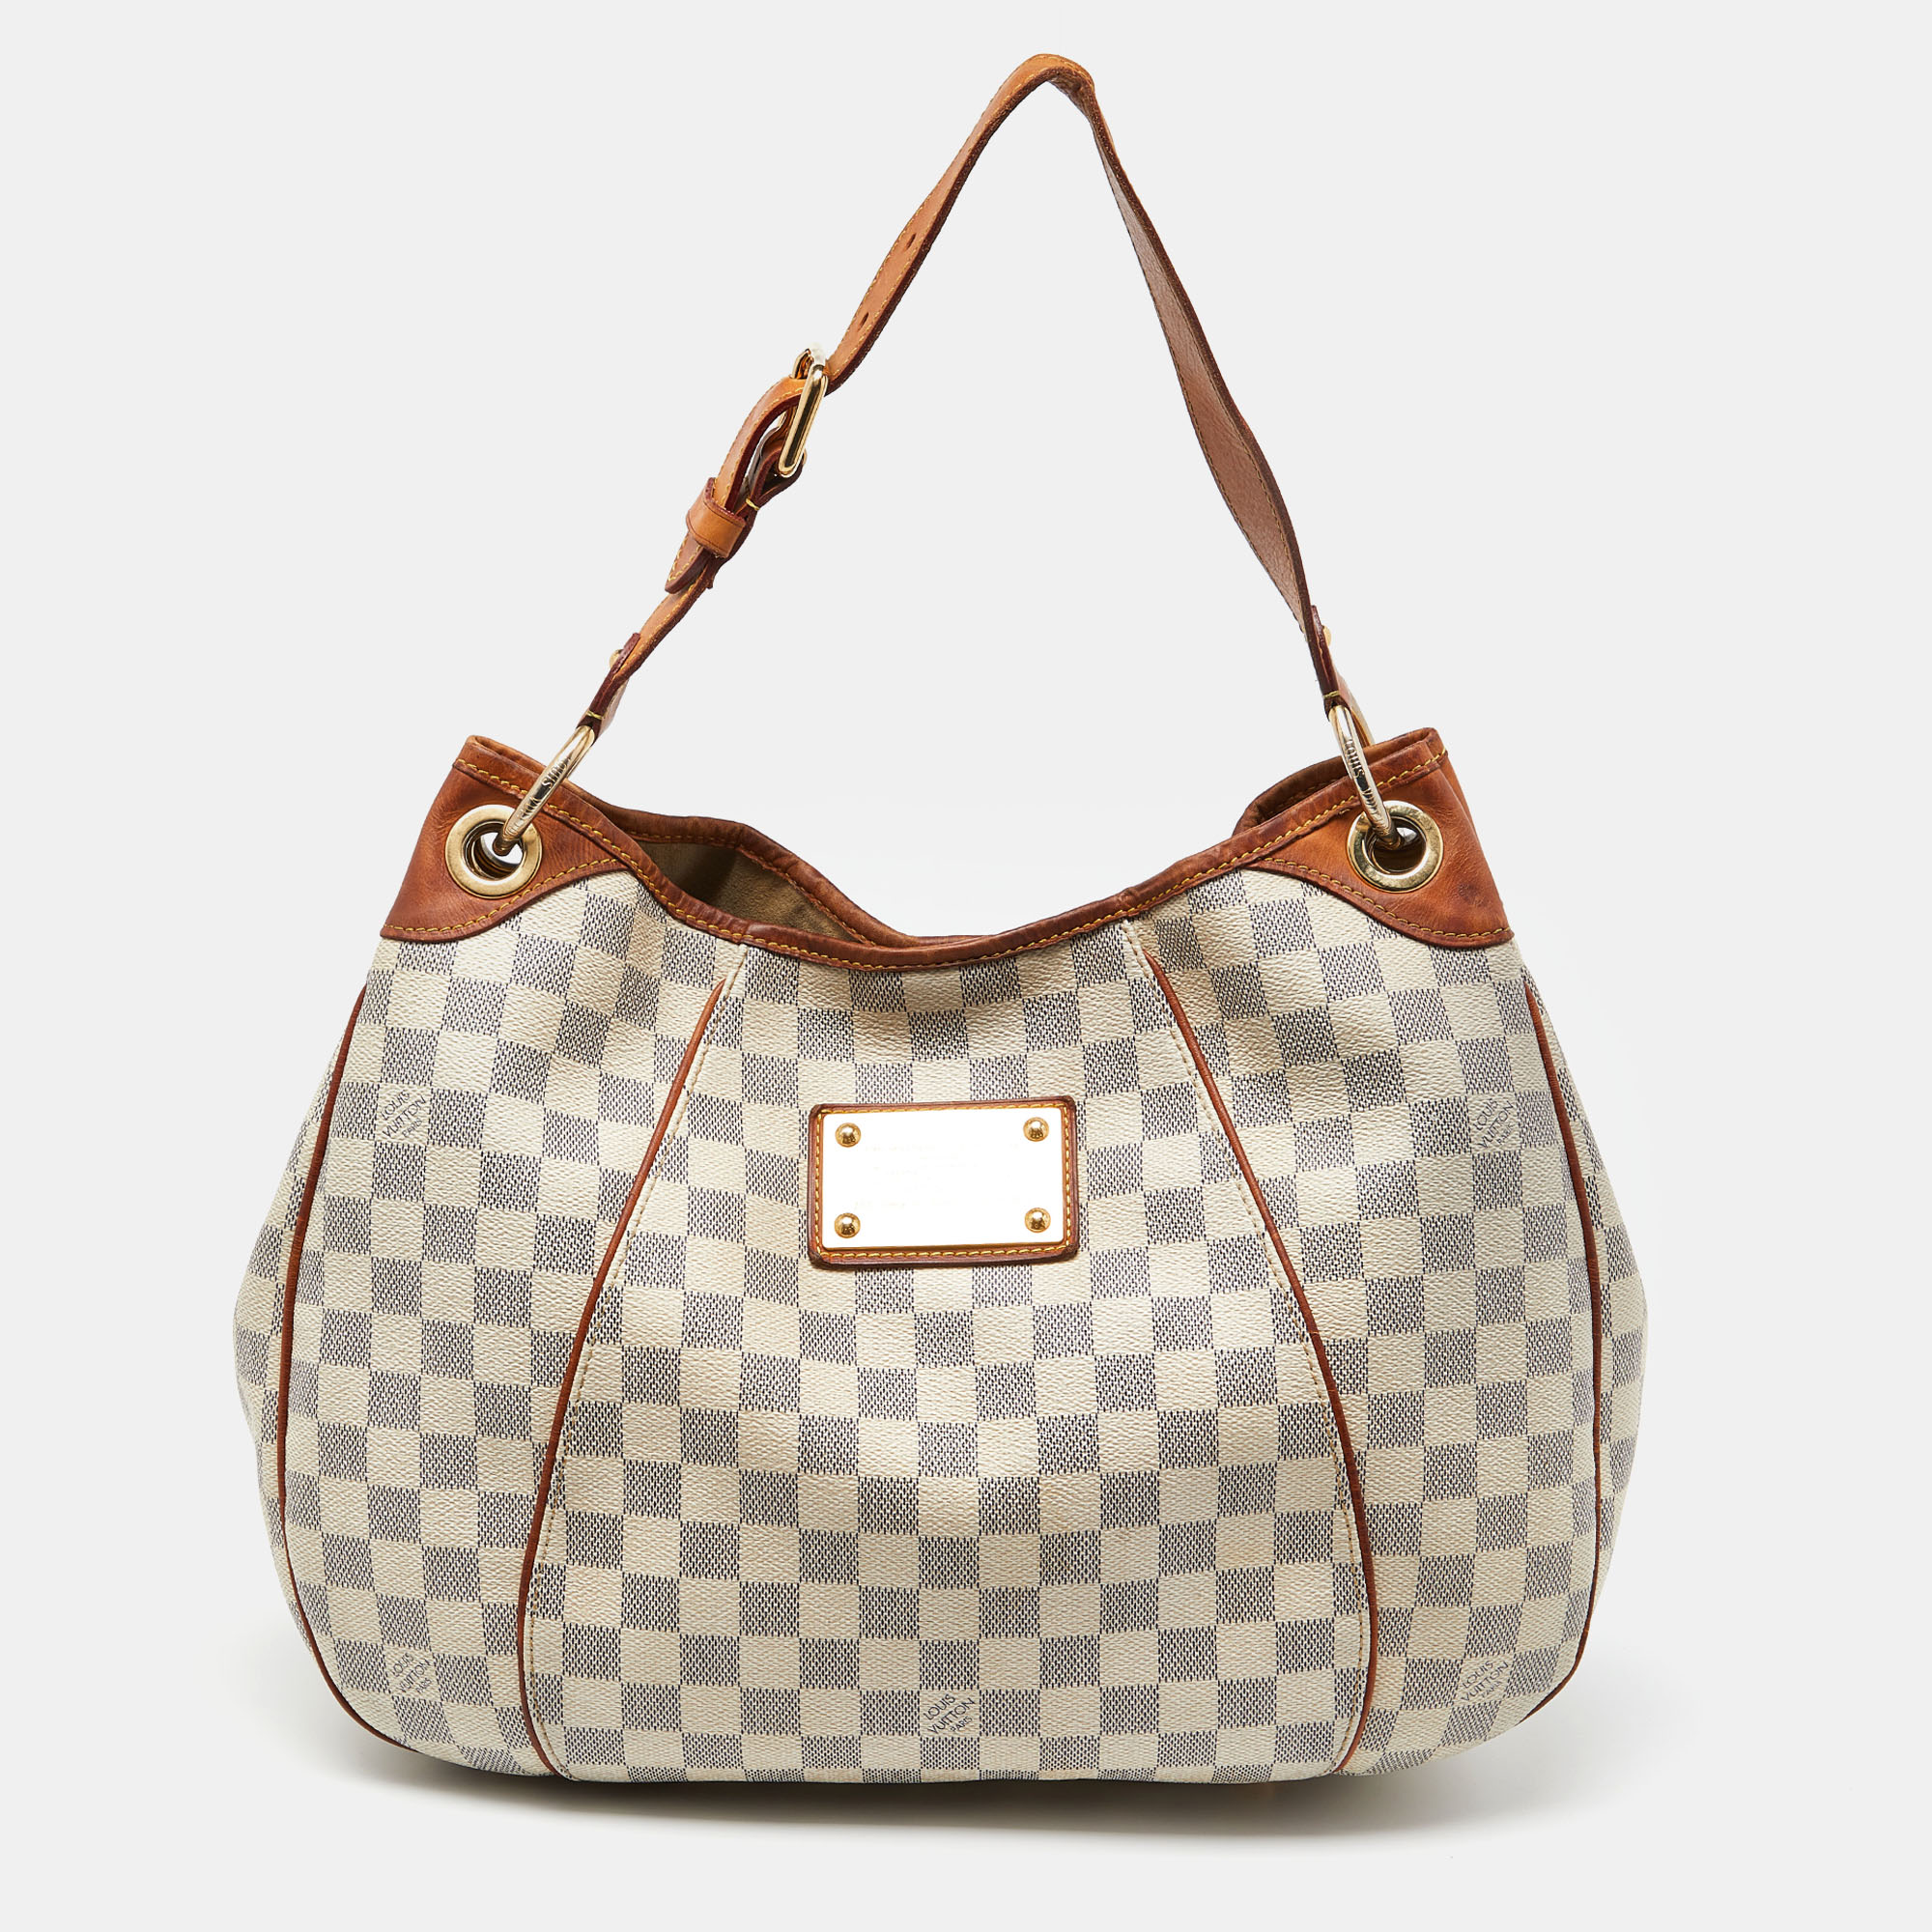 Pre-owned Louis Vuitton Damier Azur Canvas Galliera Pm Bag In White